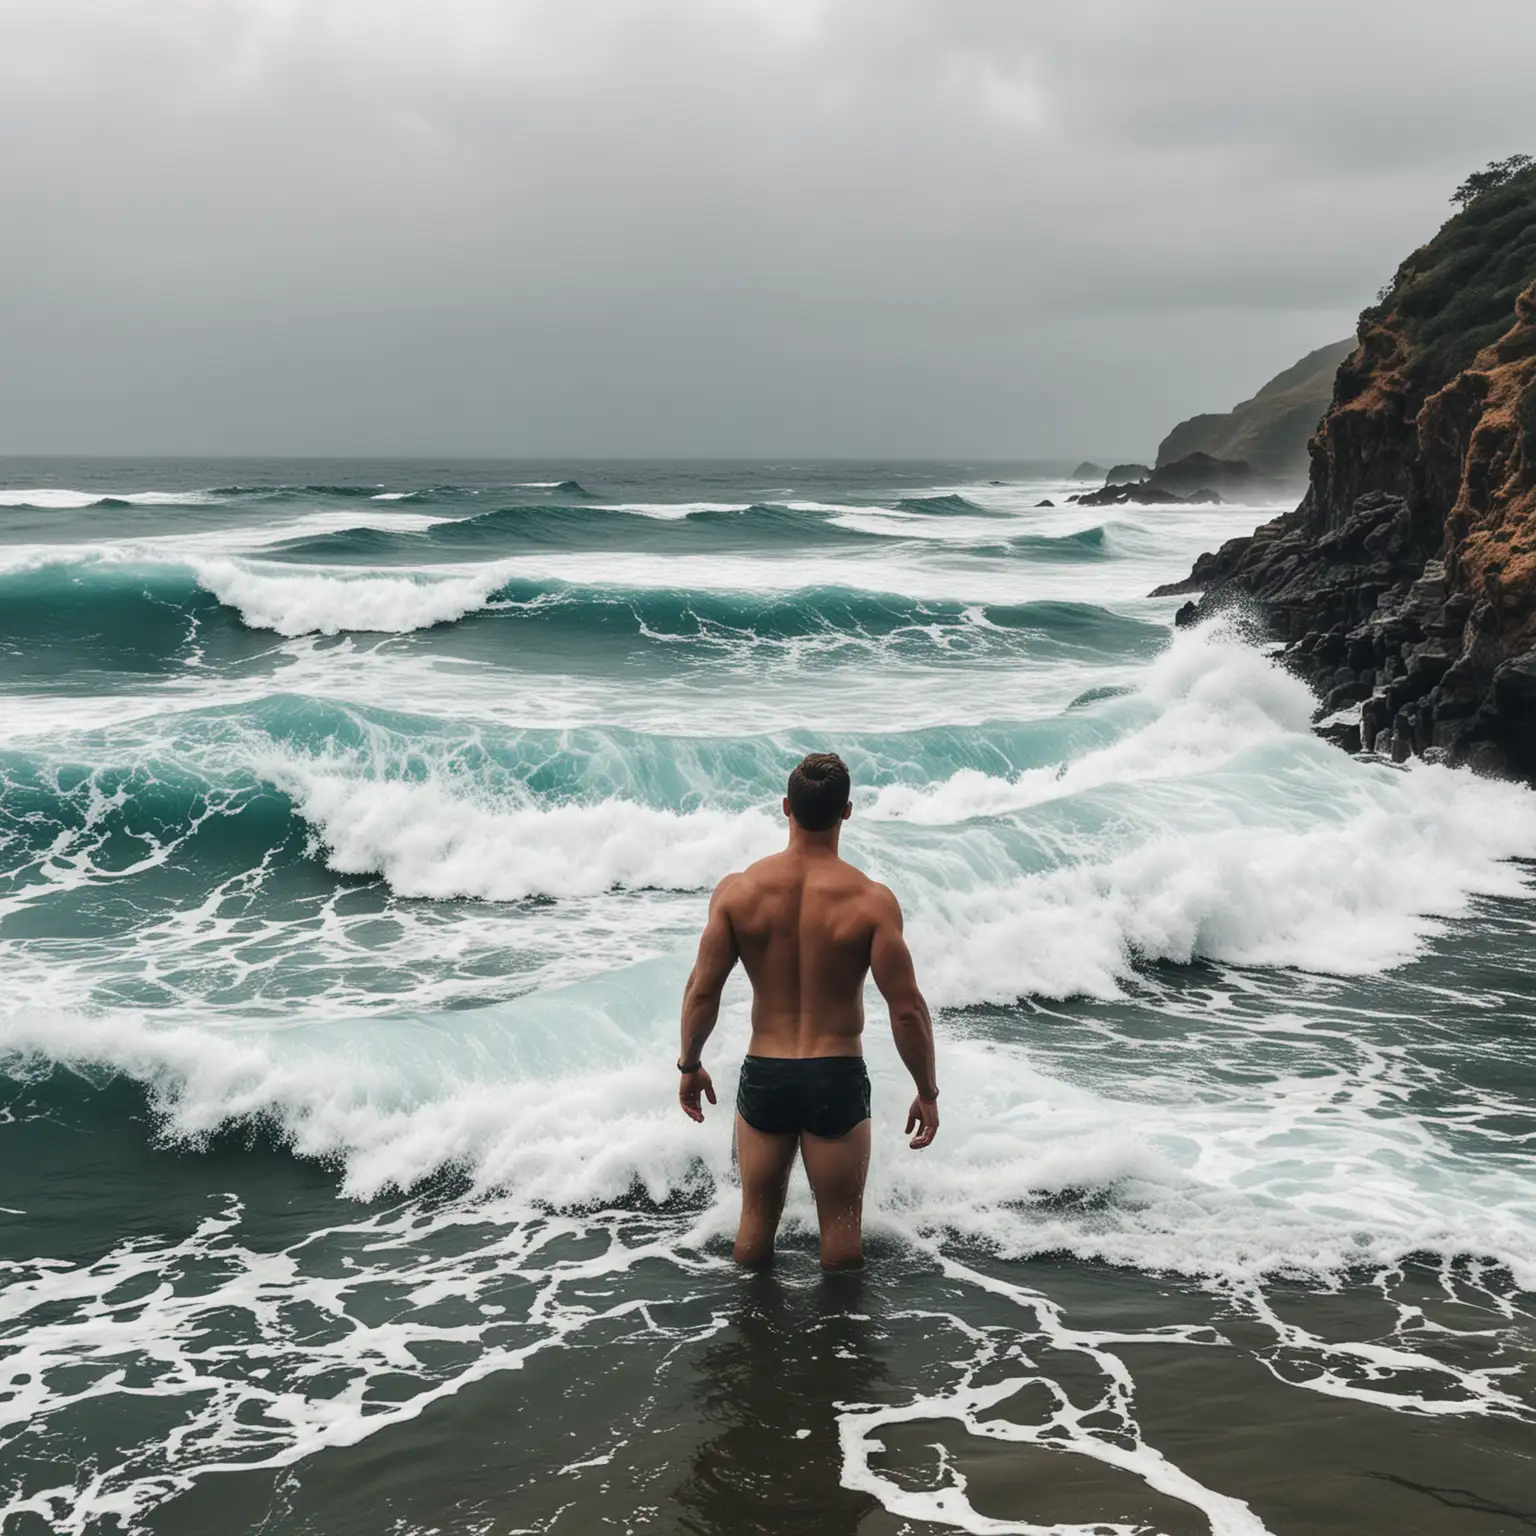 man standing in waist deep water looking out to epic ocean waves, shirtless, taking in the view, image be from the viewpoint of behind the man, 